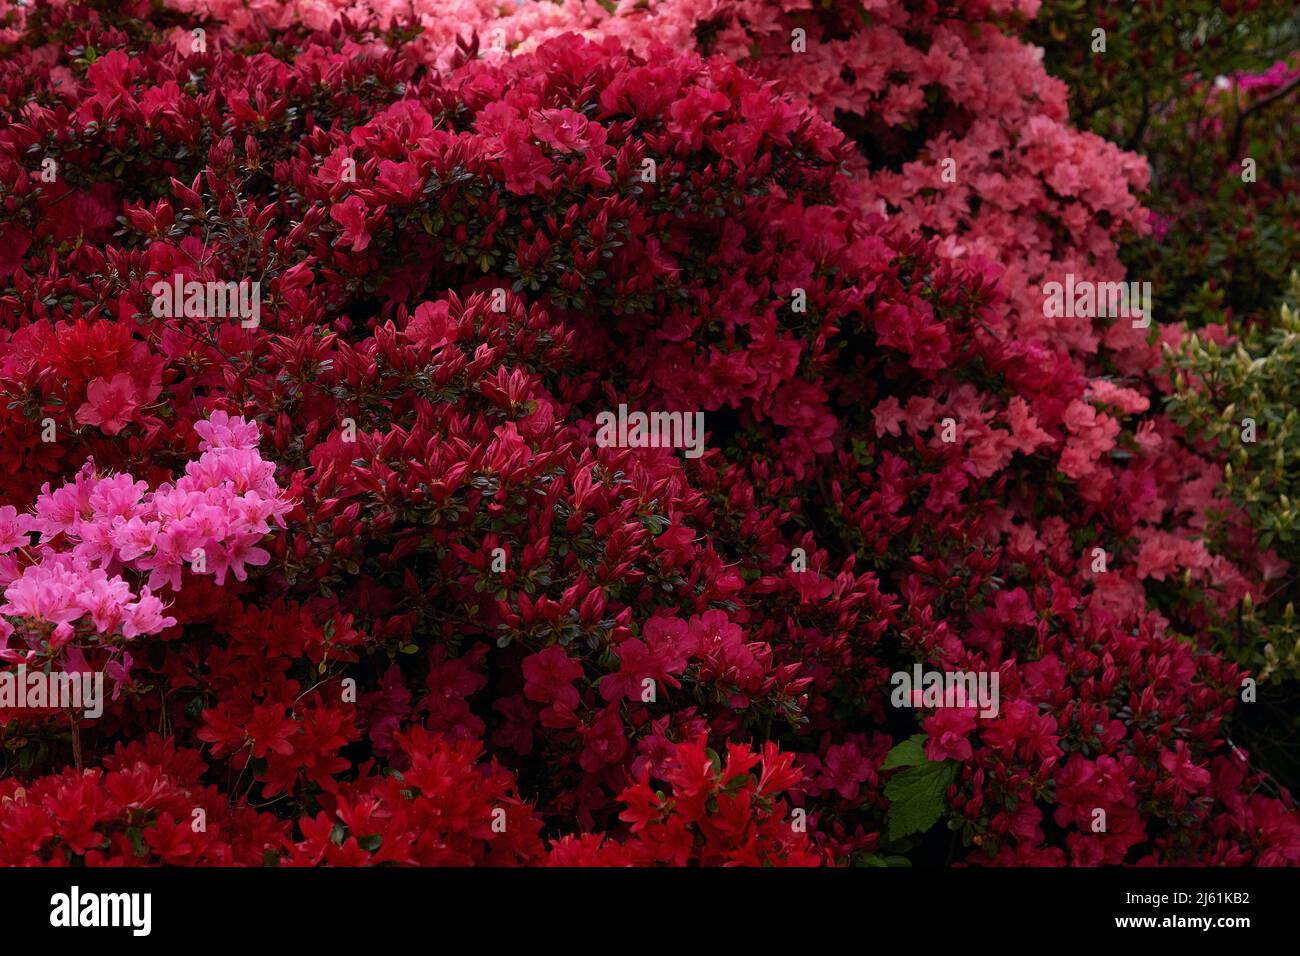 Red and pink flowers of evergreen garden shrubs azaleas seen flowering in spring outdoors. Stock Photo